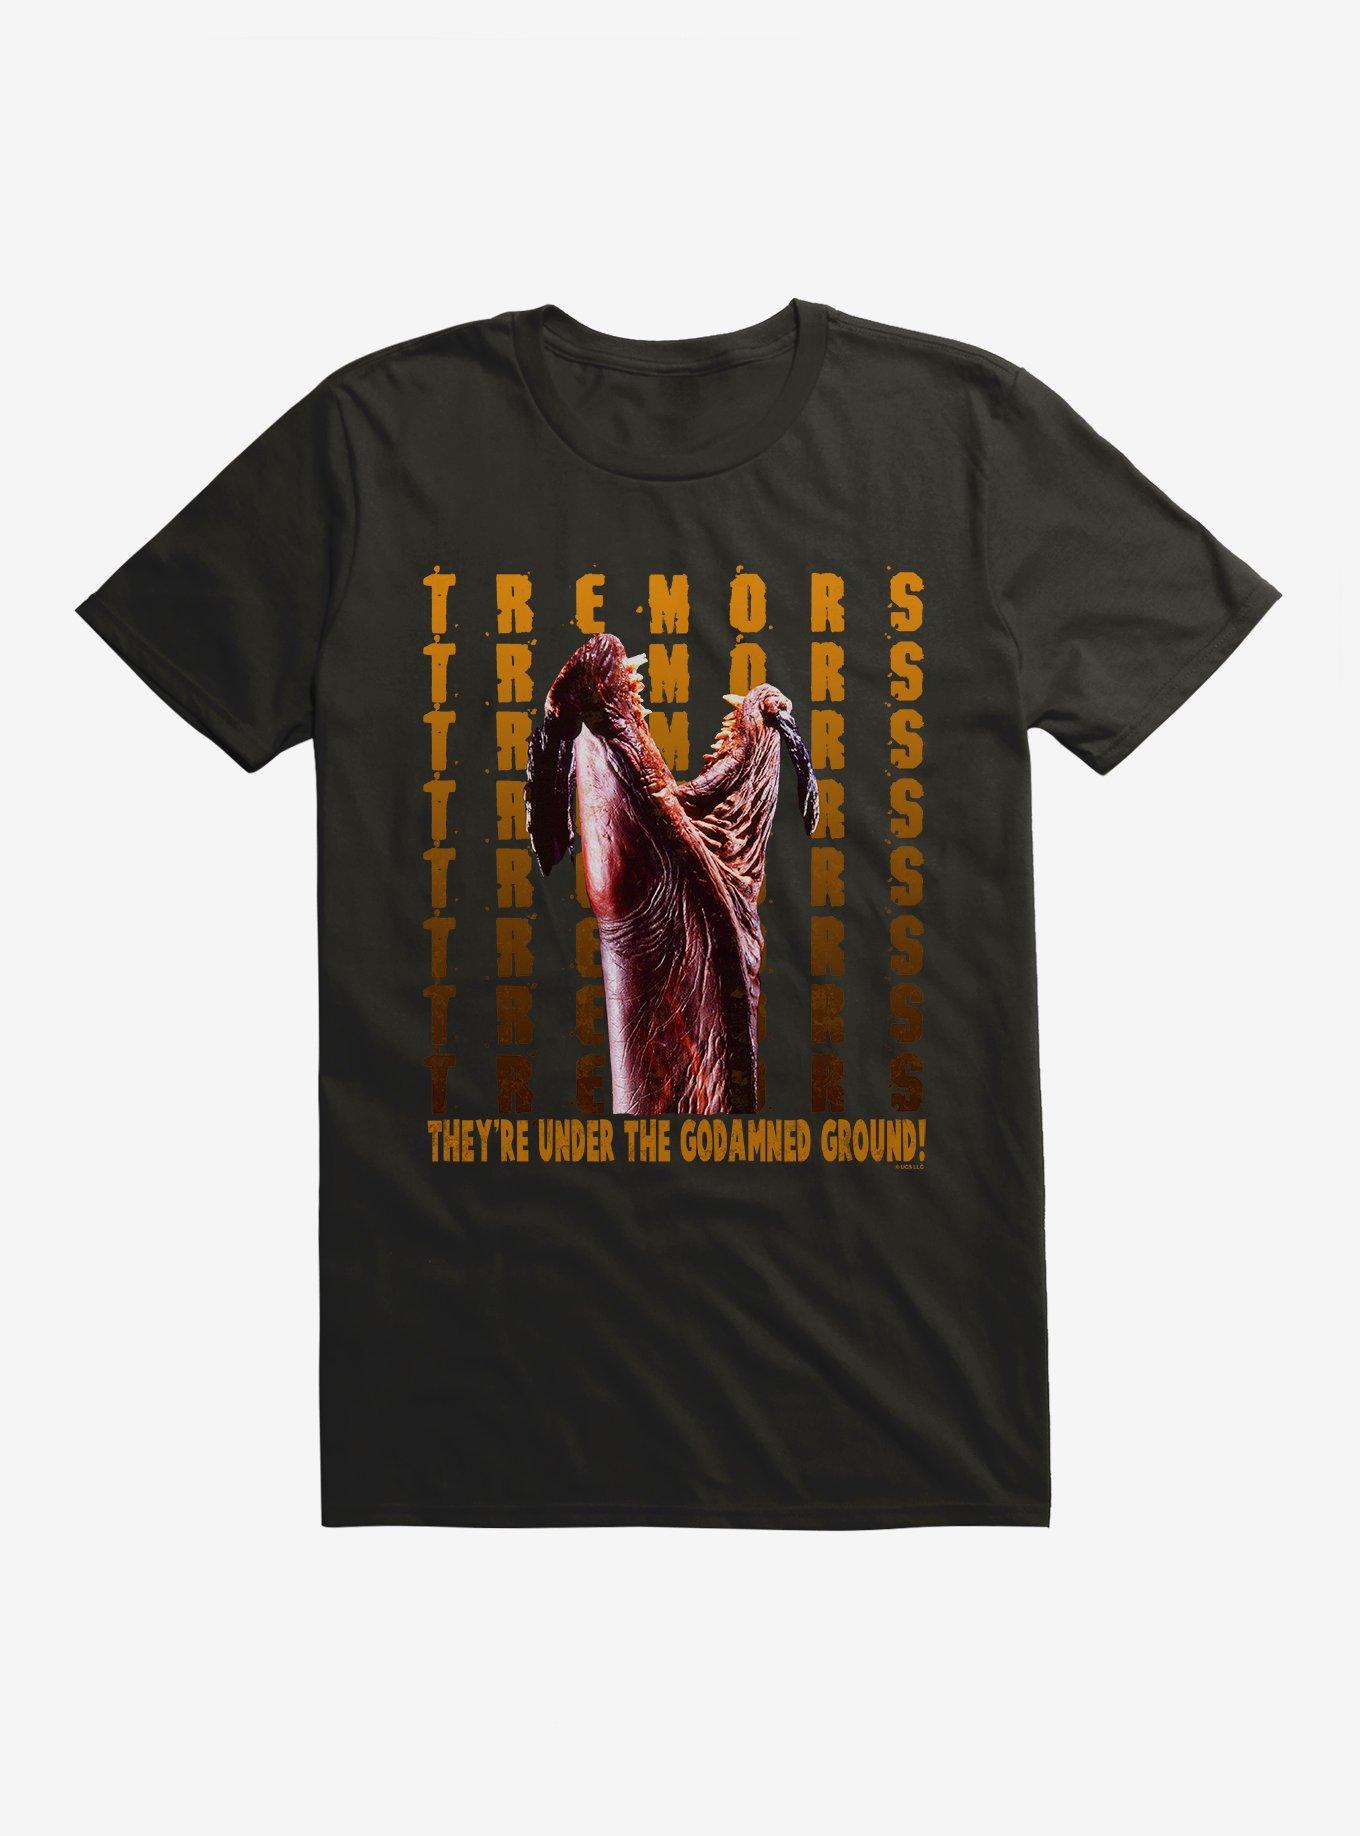 Tremors They're Under The Godamned Ground! T-Shirt, , hi-res